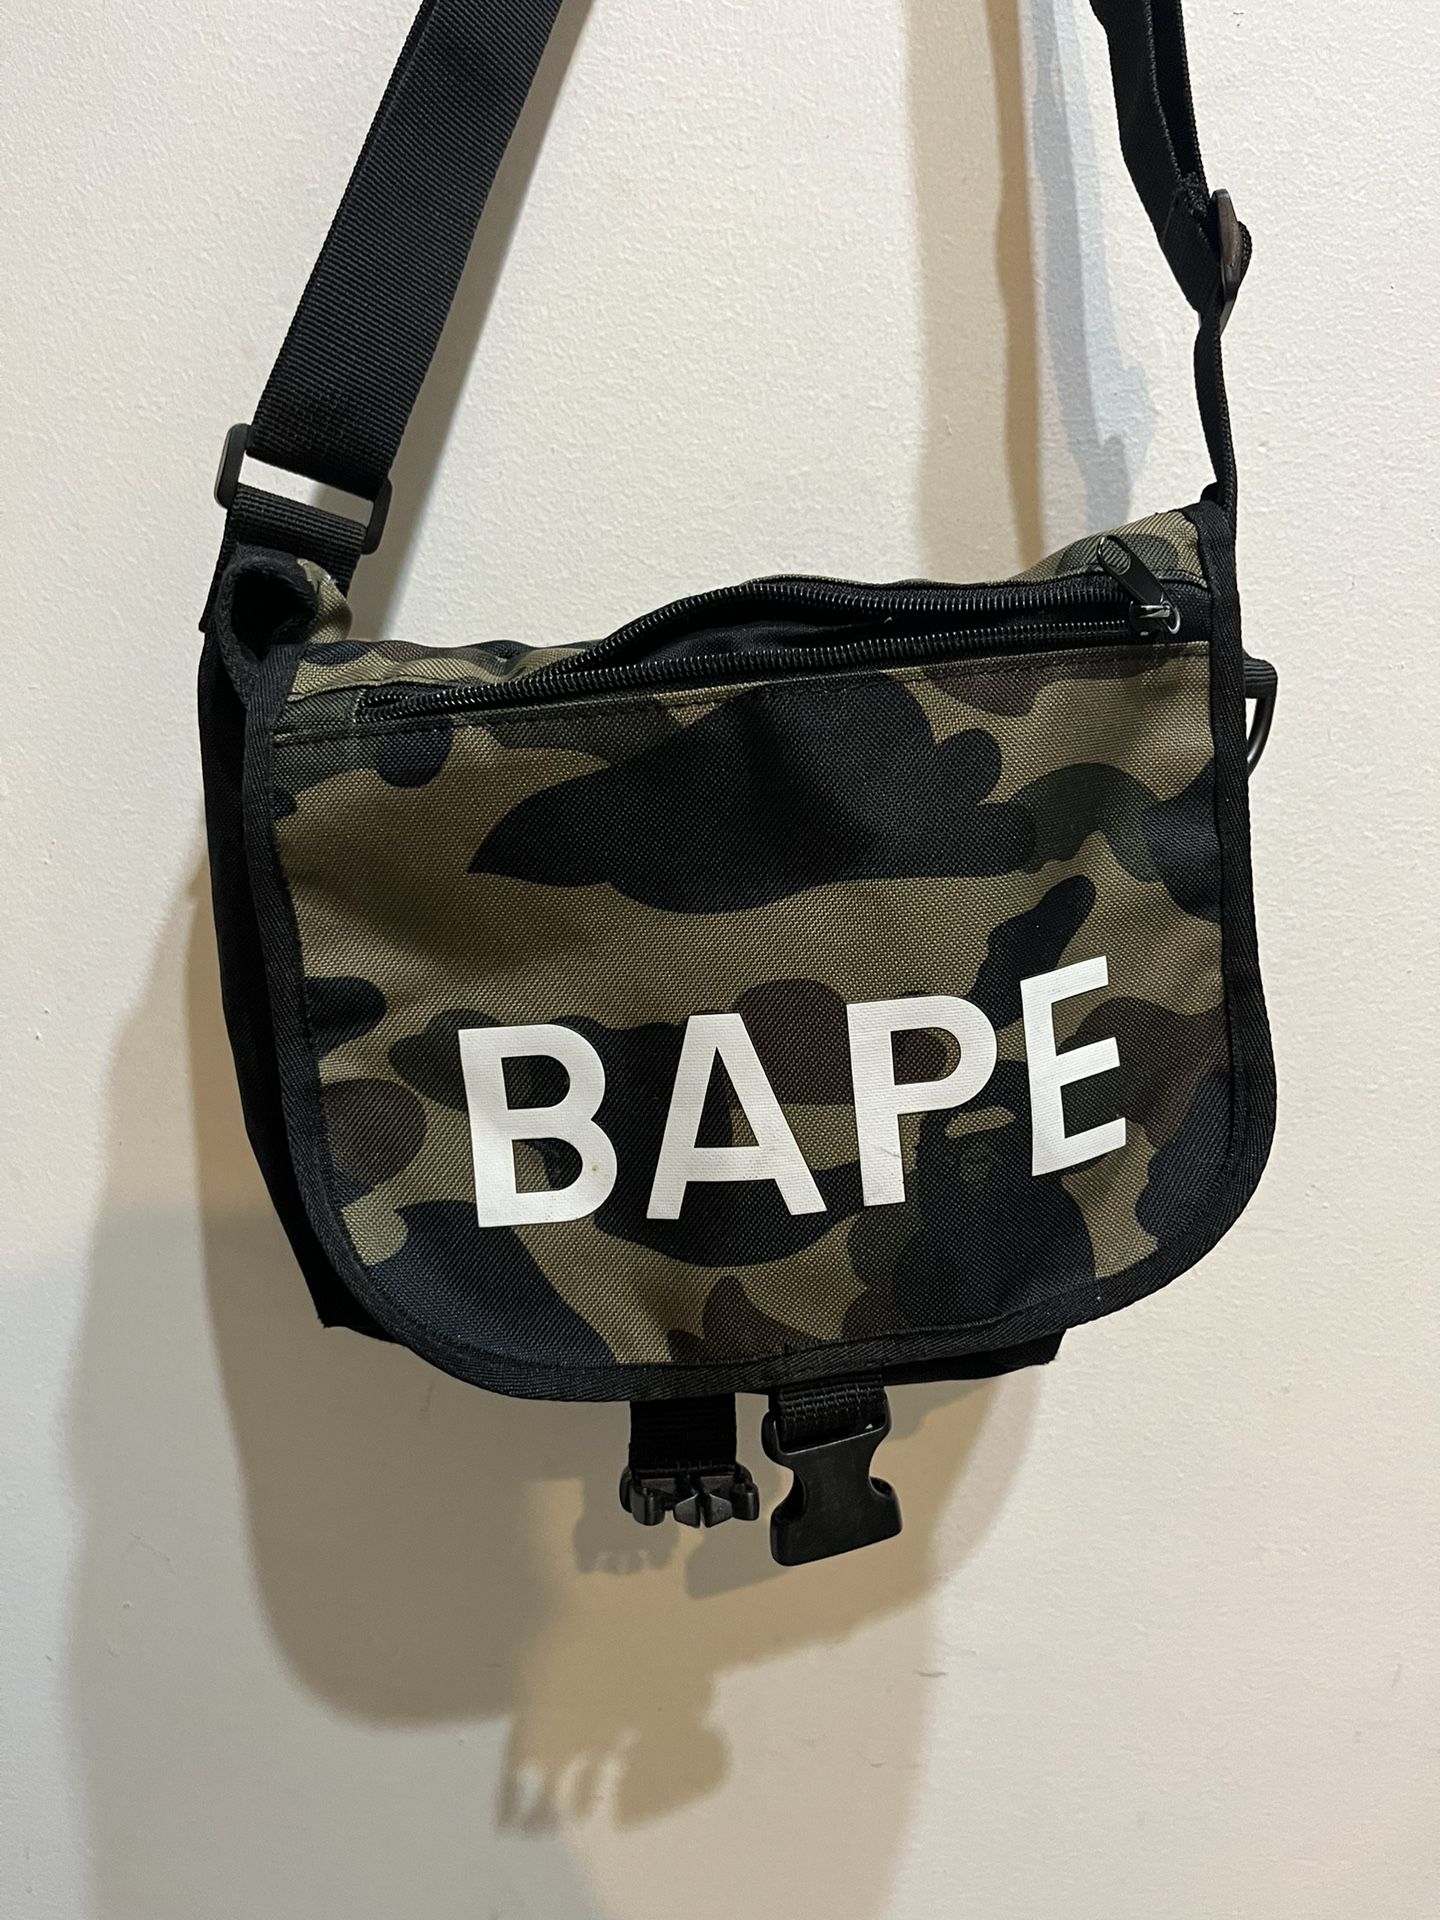 BAPE Duffle Black Camo Carry On Travel Gym Bag Ds New for Sale in Chicago,  IL - OfferUp